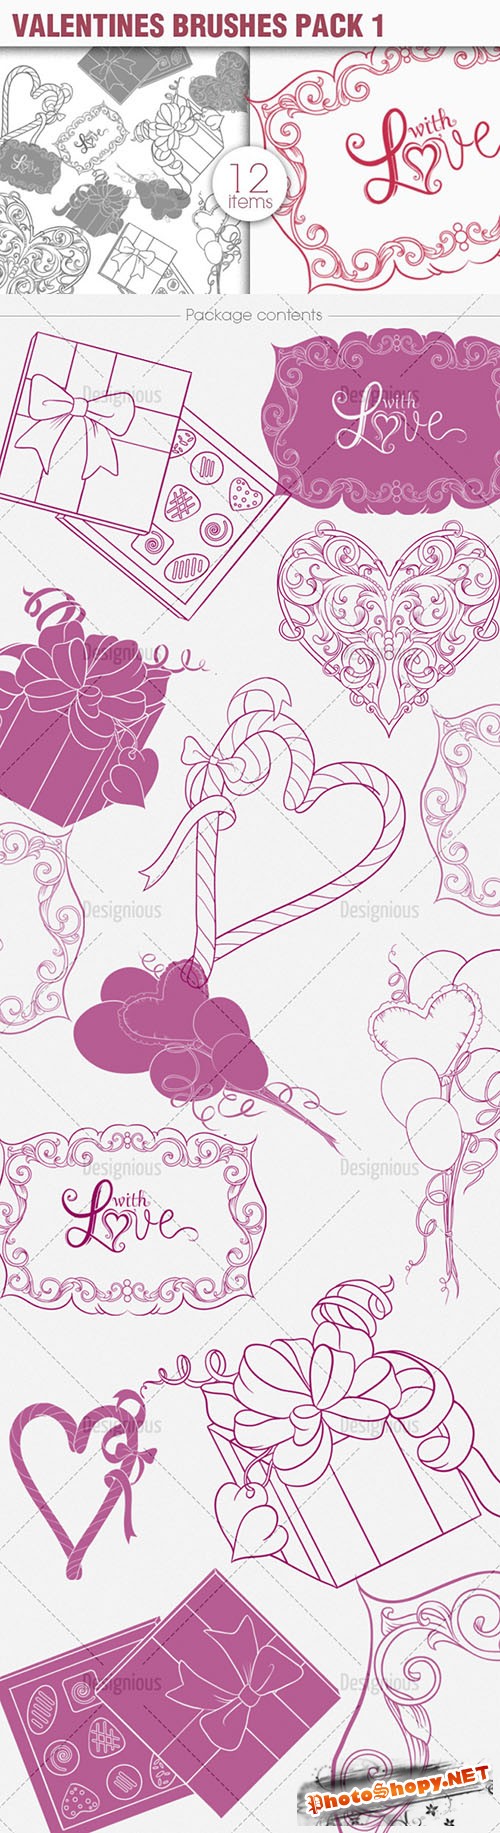 Valentines Day Photoshop Brushes Pack 1 6048